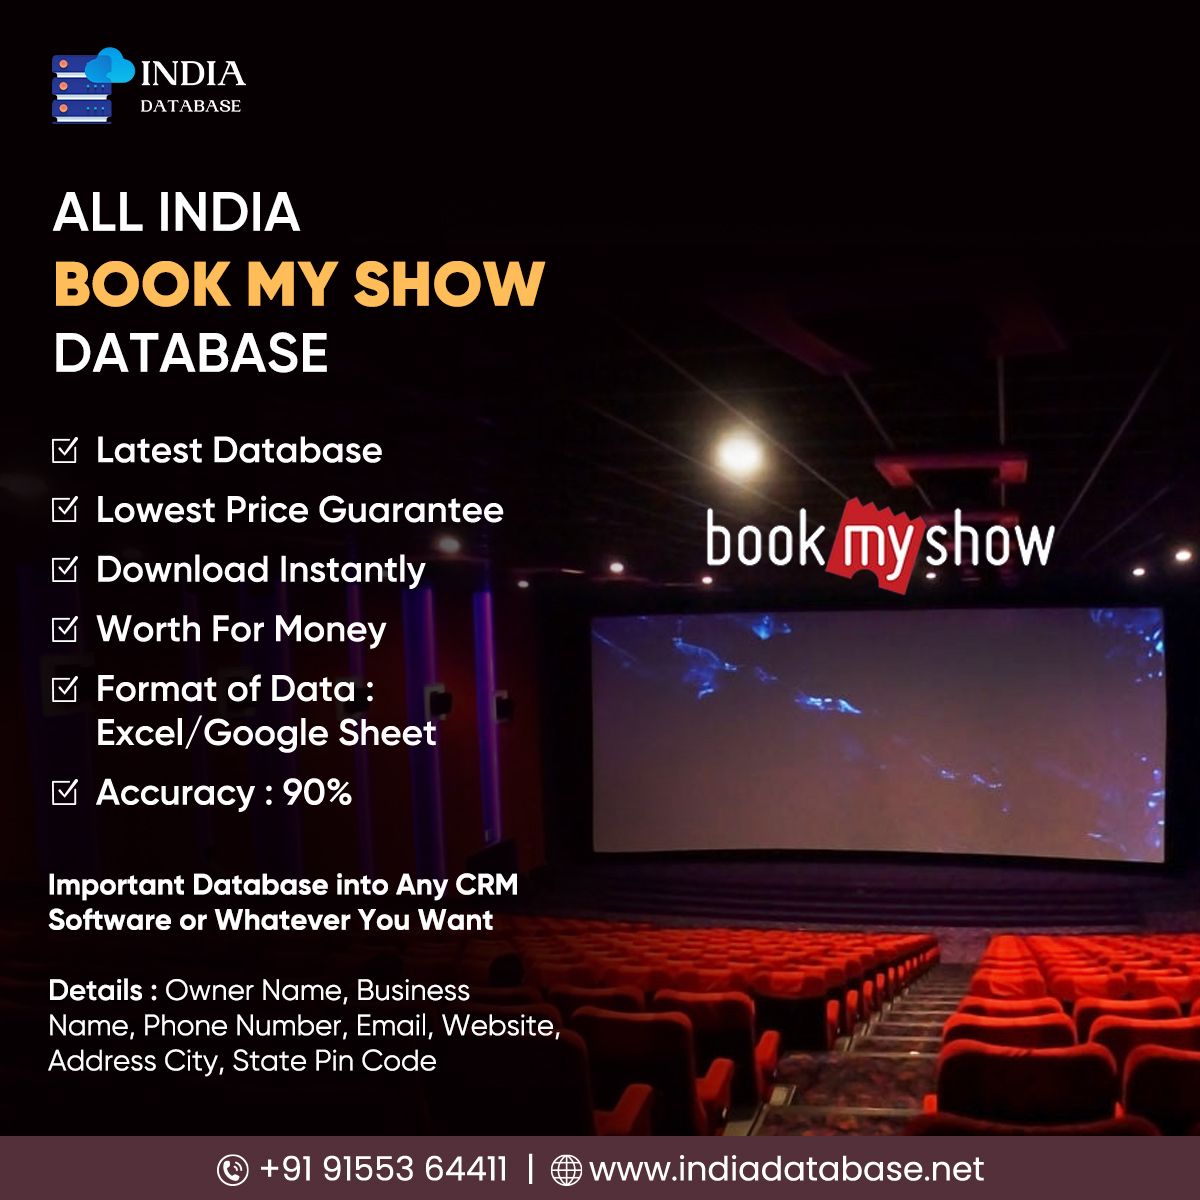 All India Book My Show Database